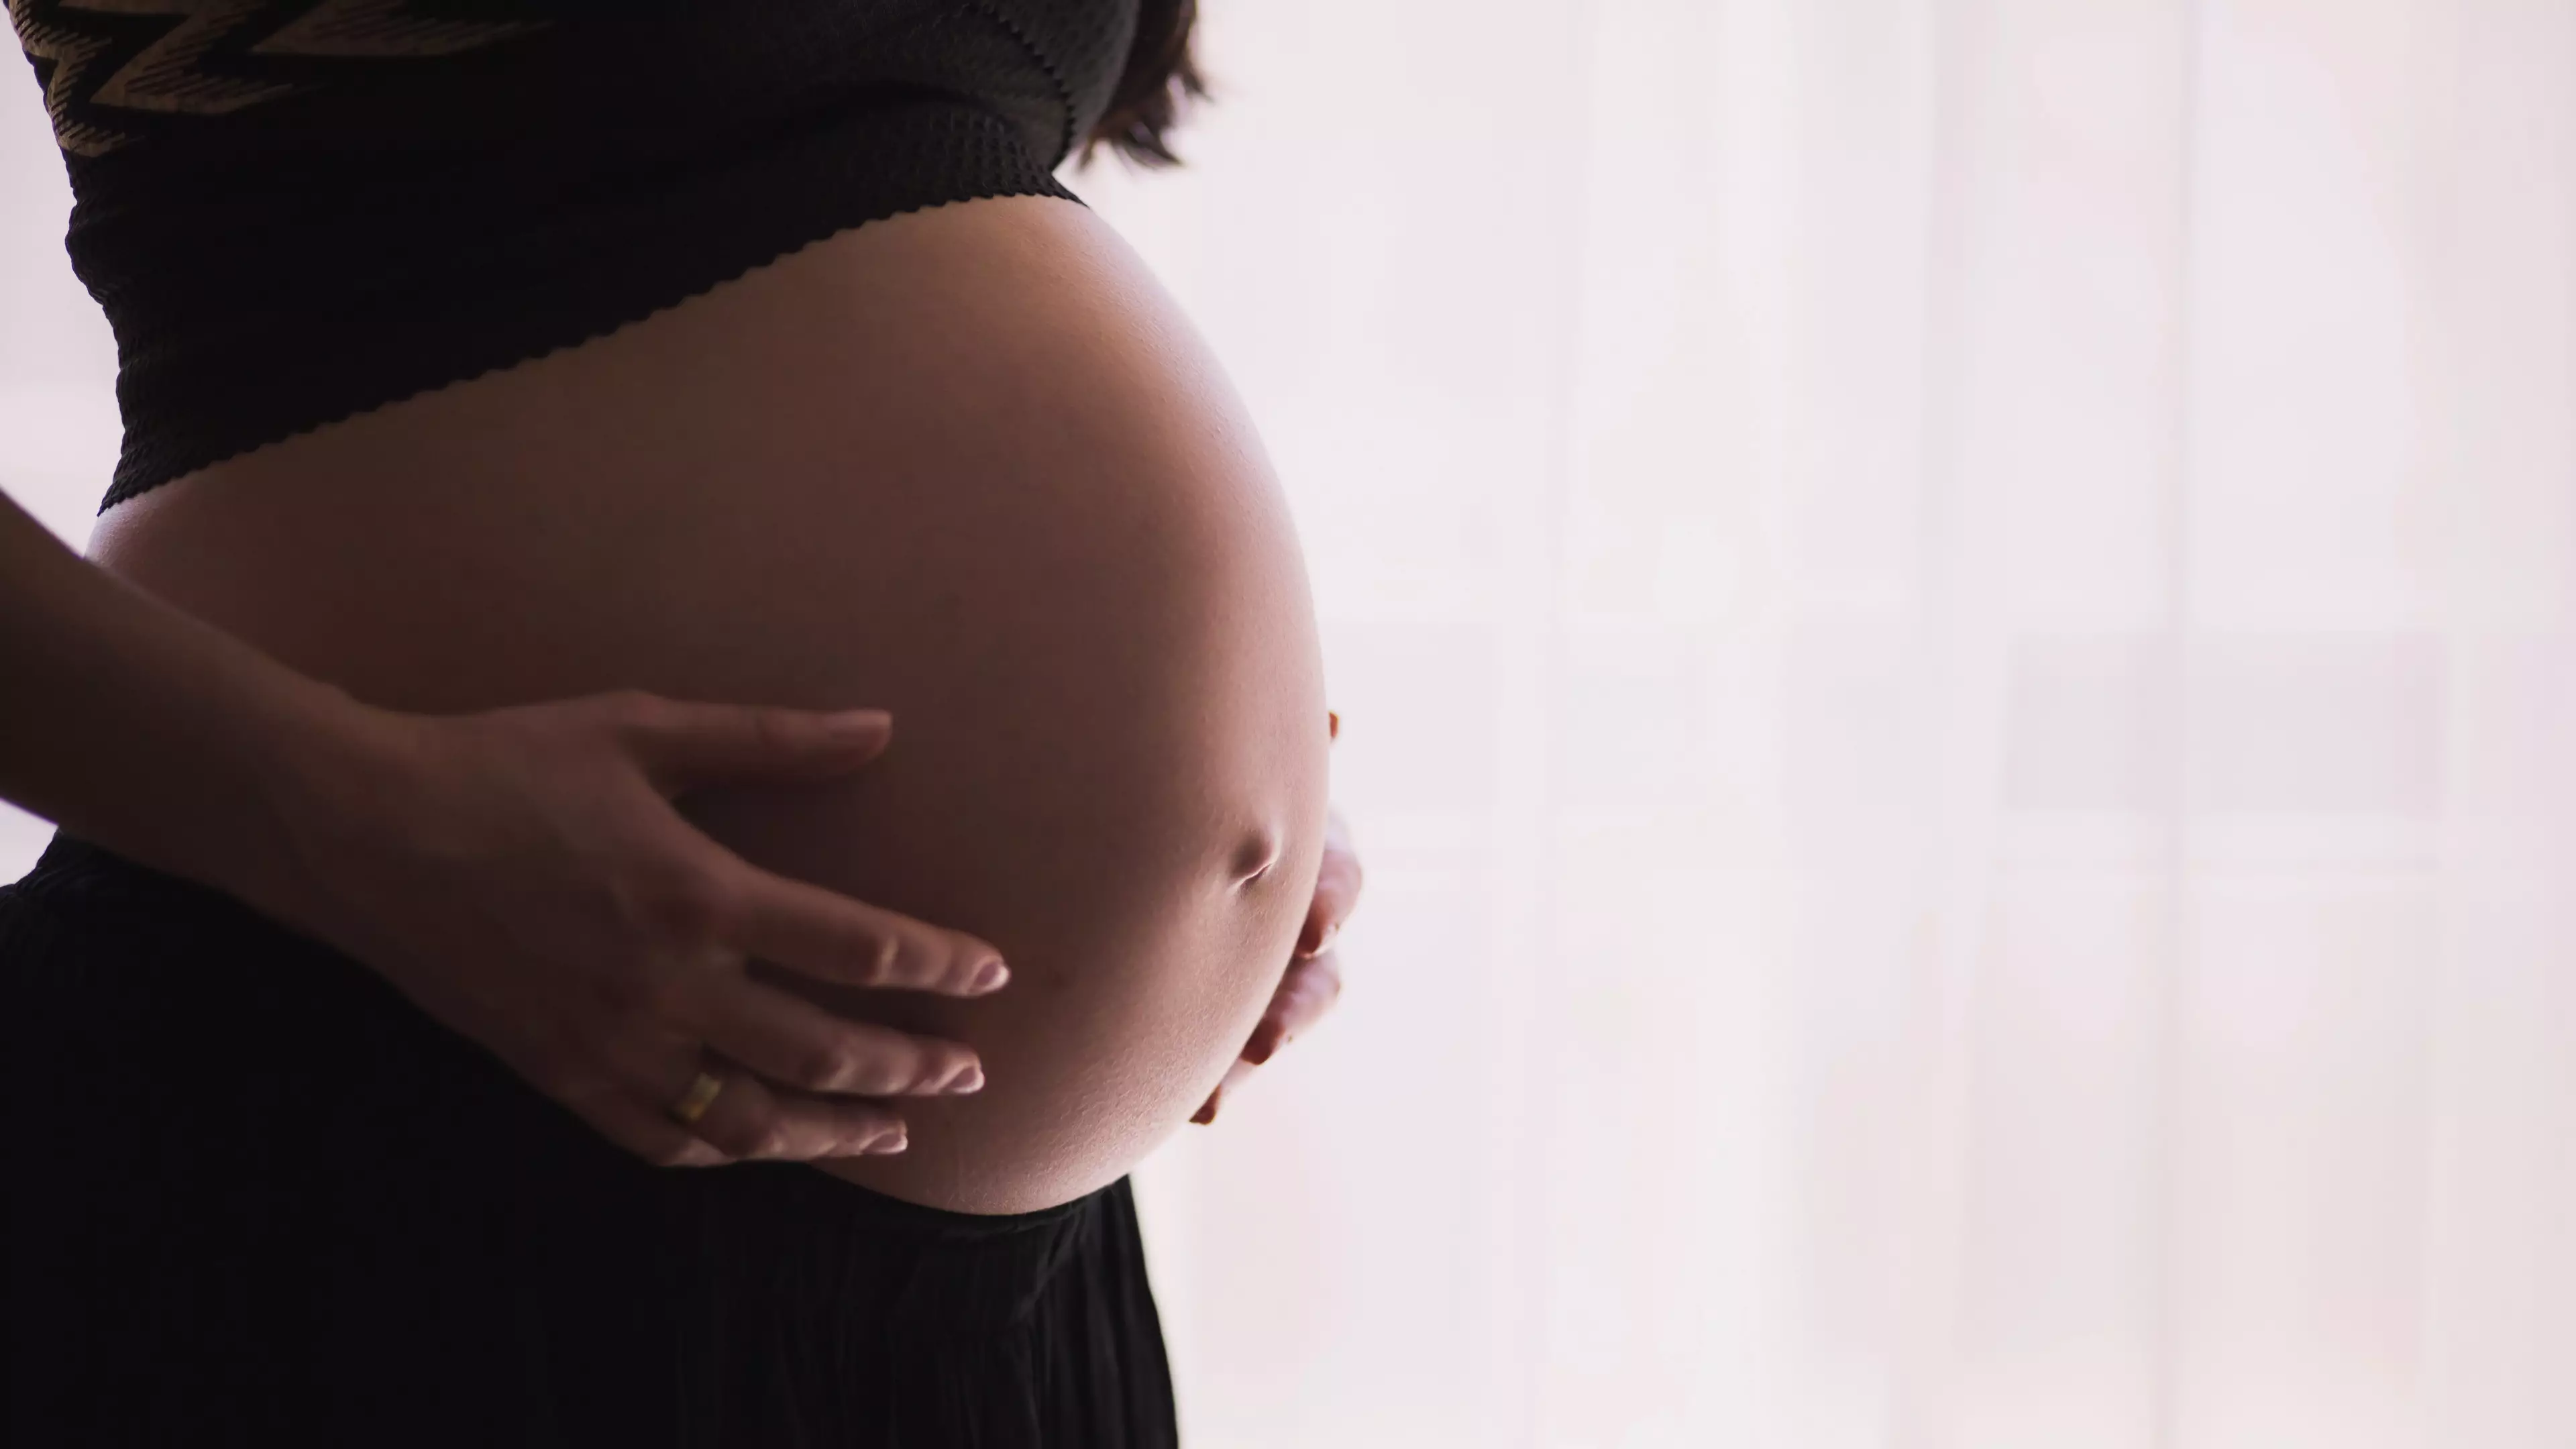  Pregnant Women Allowed Partner Alongside Them At All Times In New Covid NHS Guidelines